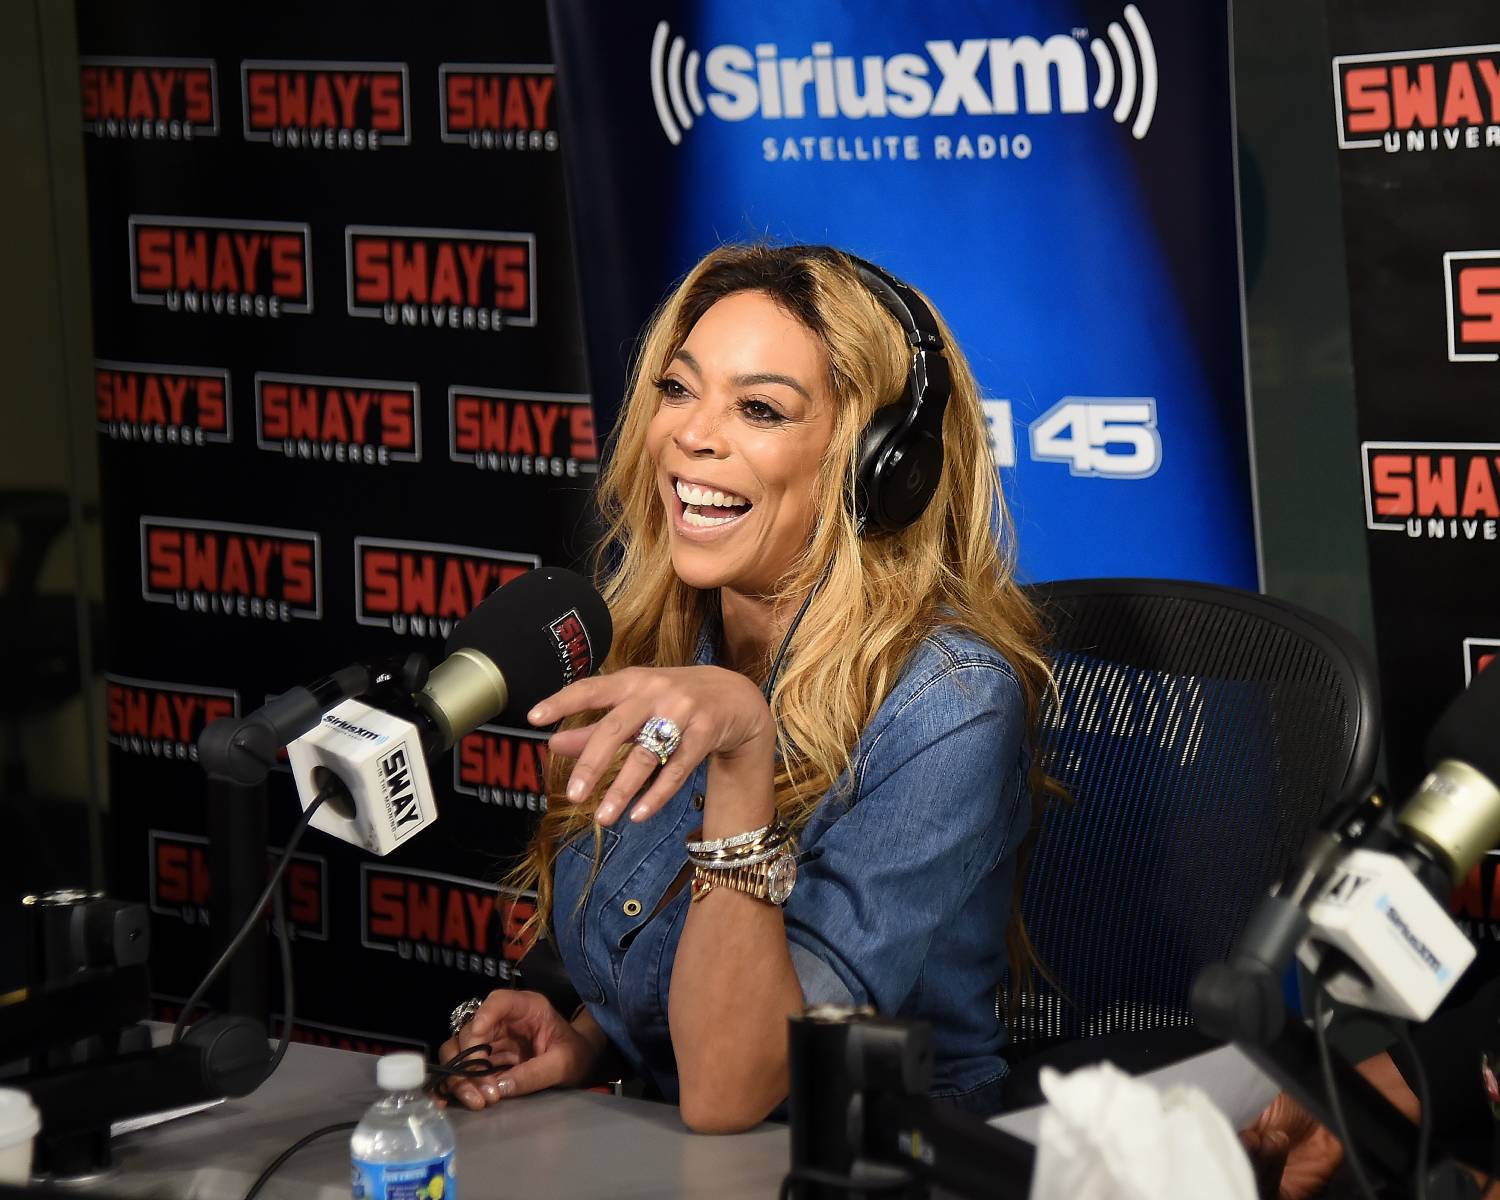 NEW YORK, NY - JULY 13: American Television host Wendy Williams visits "Shade 45" hosted by Sway at SiriusXM Studios on July 13, 2017 in New York City